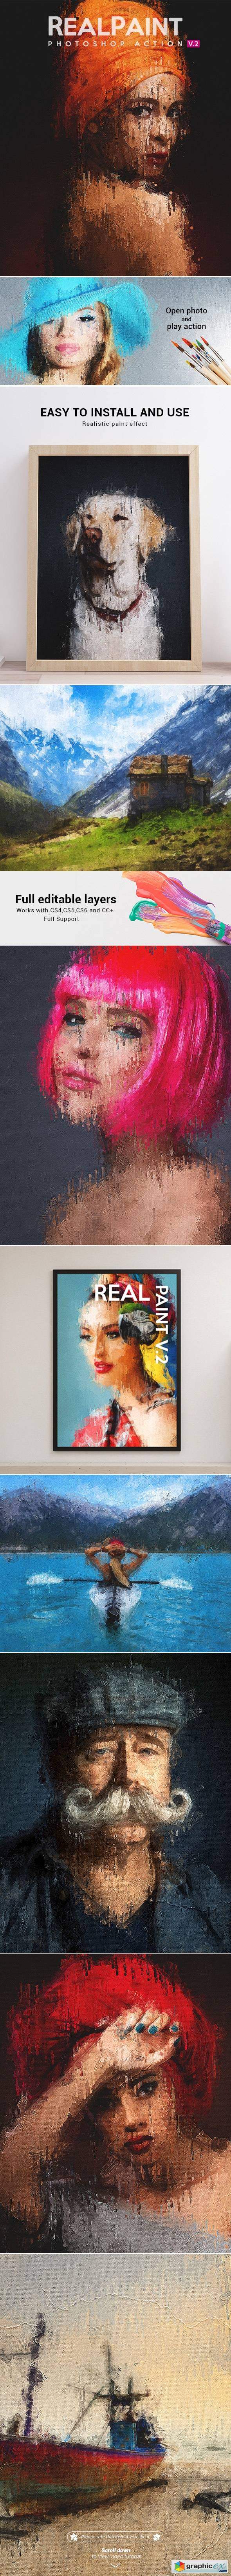 Real Paint V.2 - Photoshop Action 